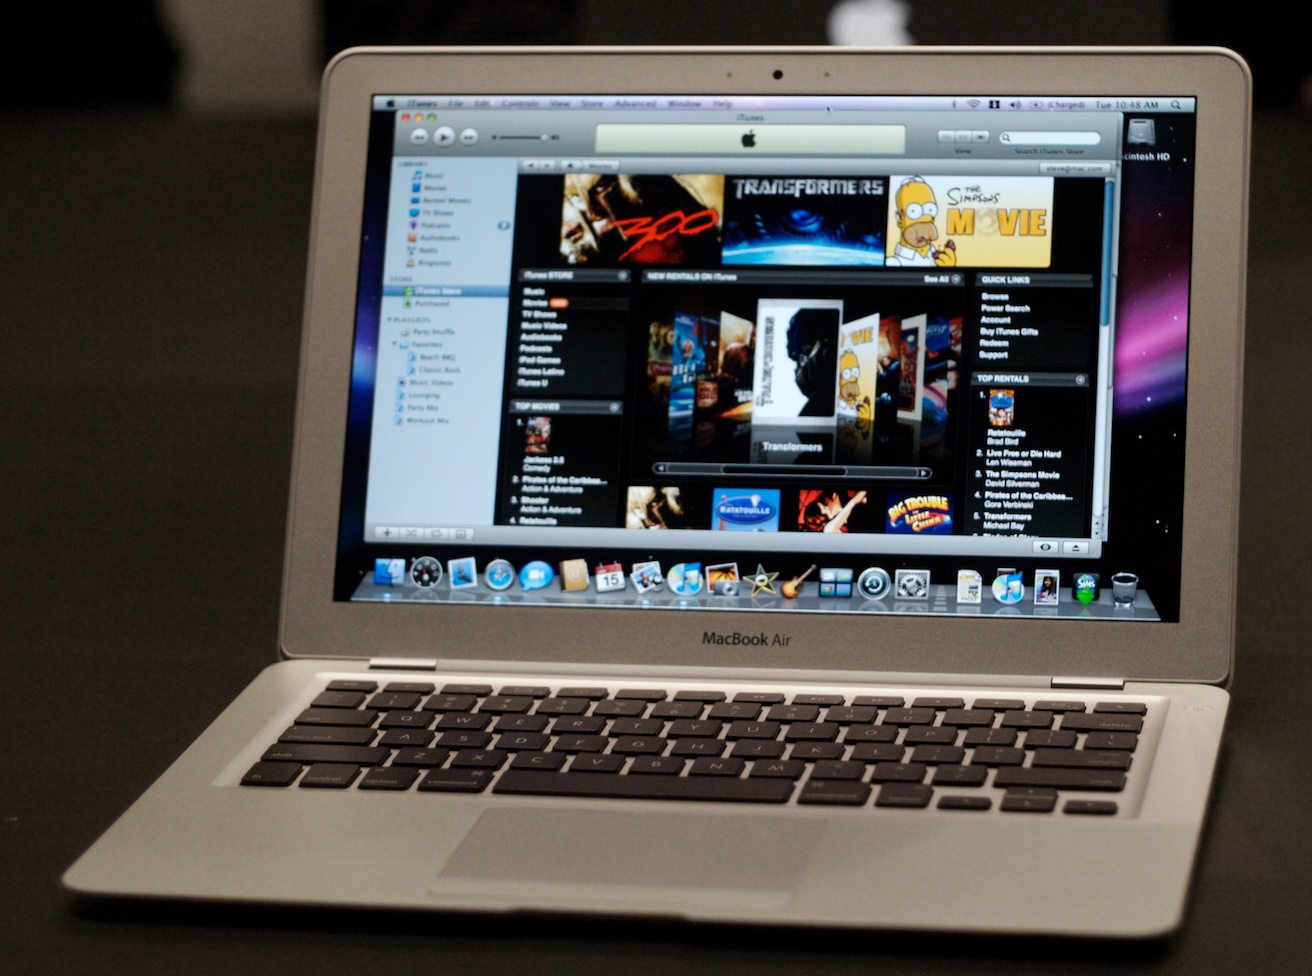 Apple MacBook Air 11.6 Inch - Catalog Product Review